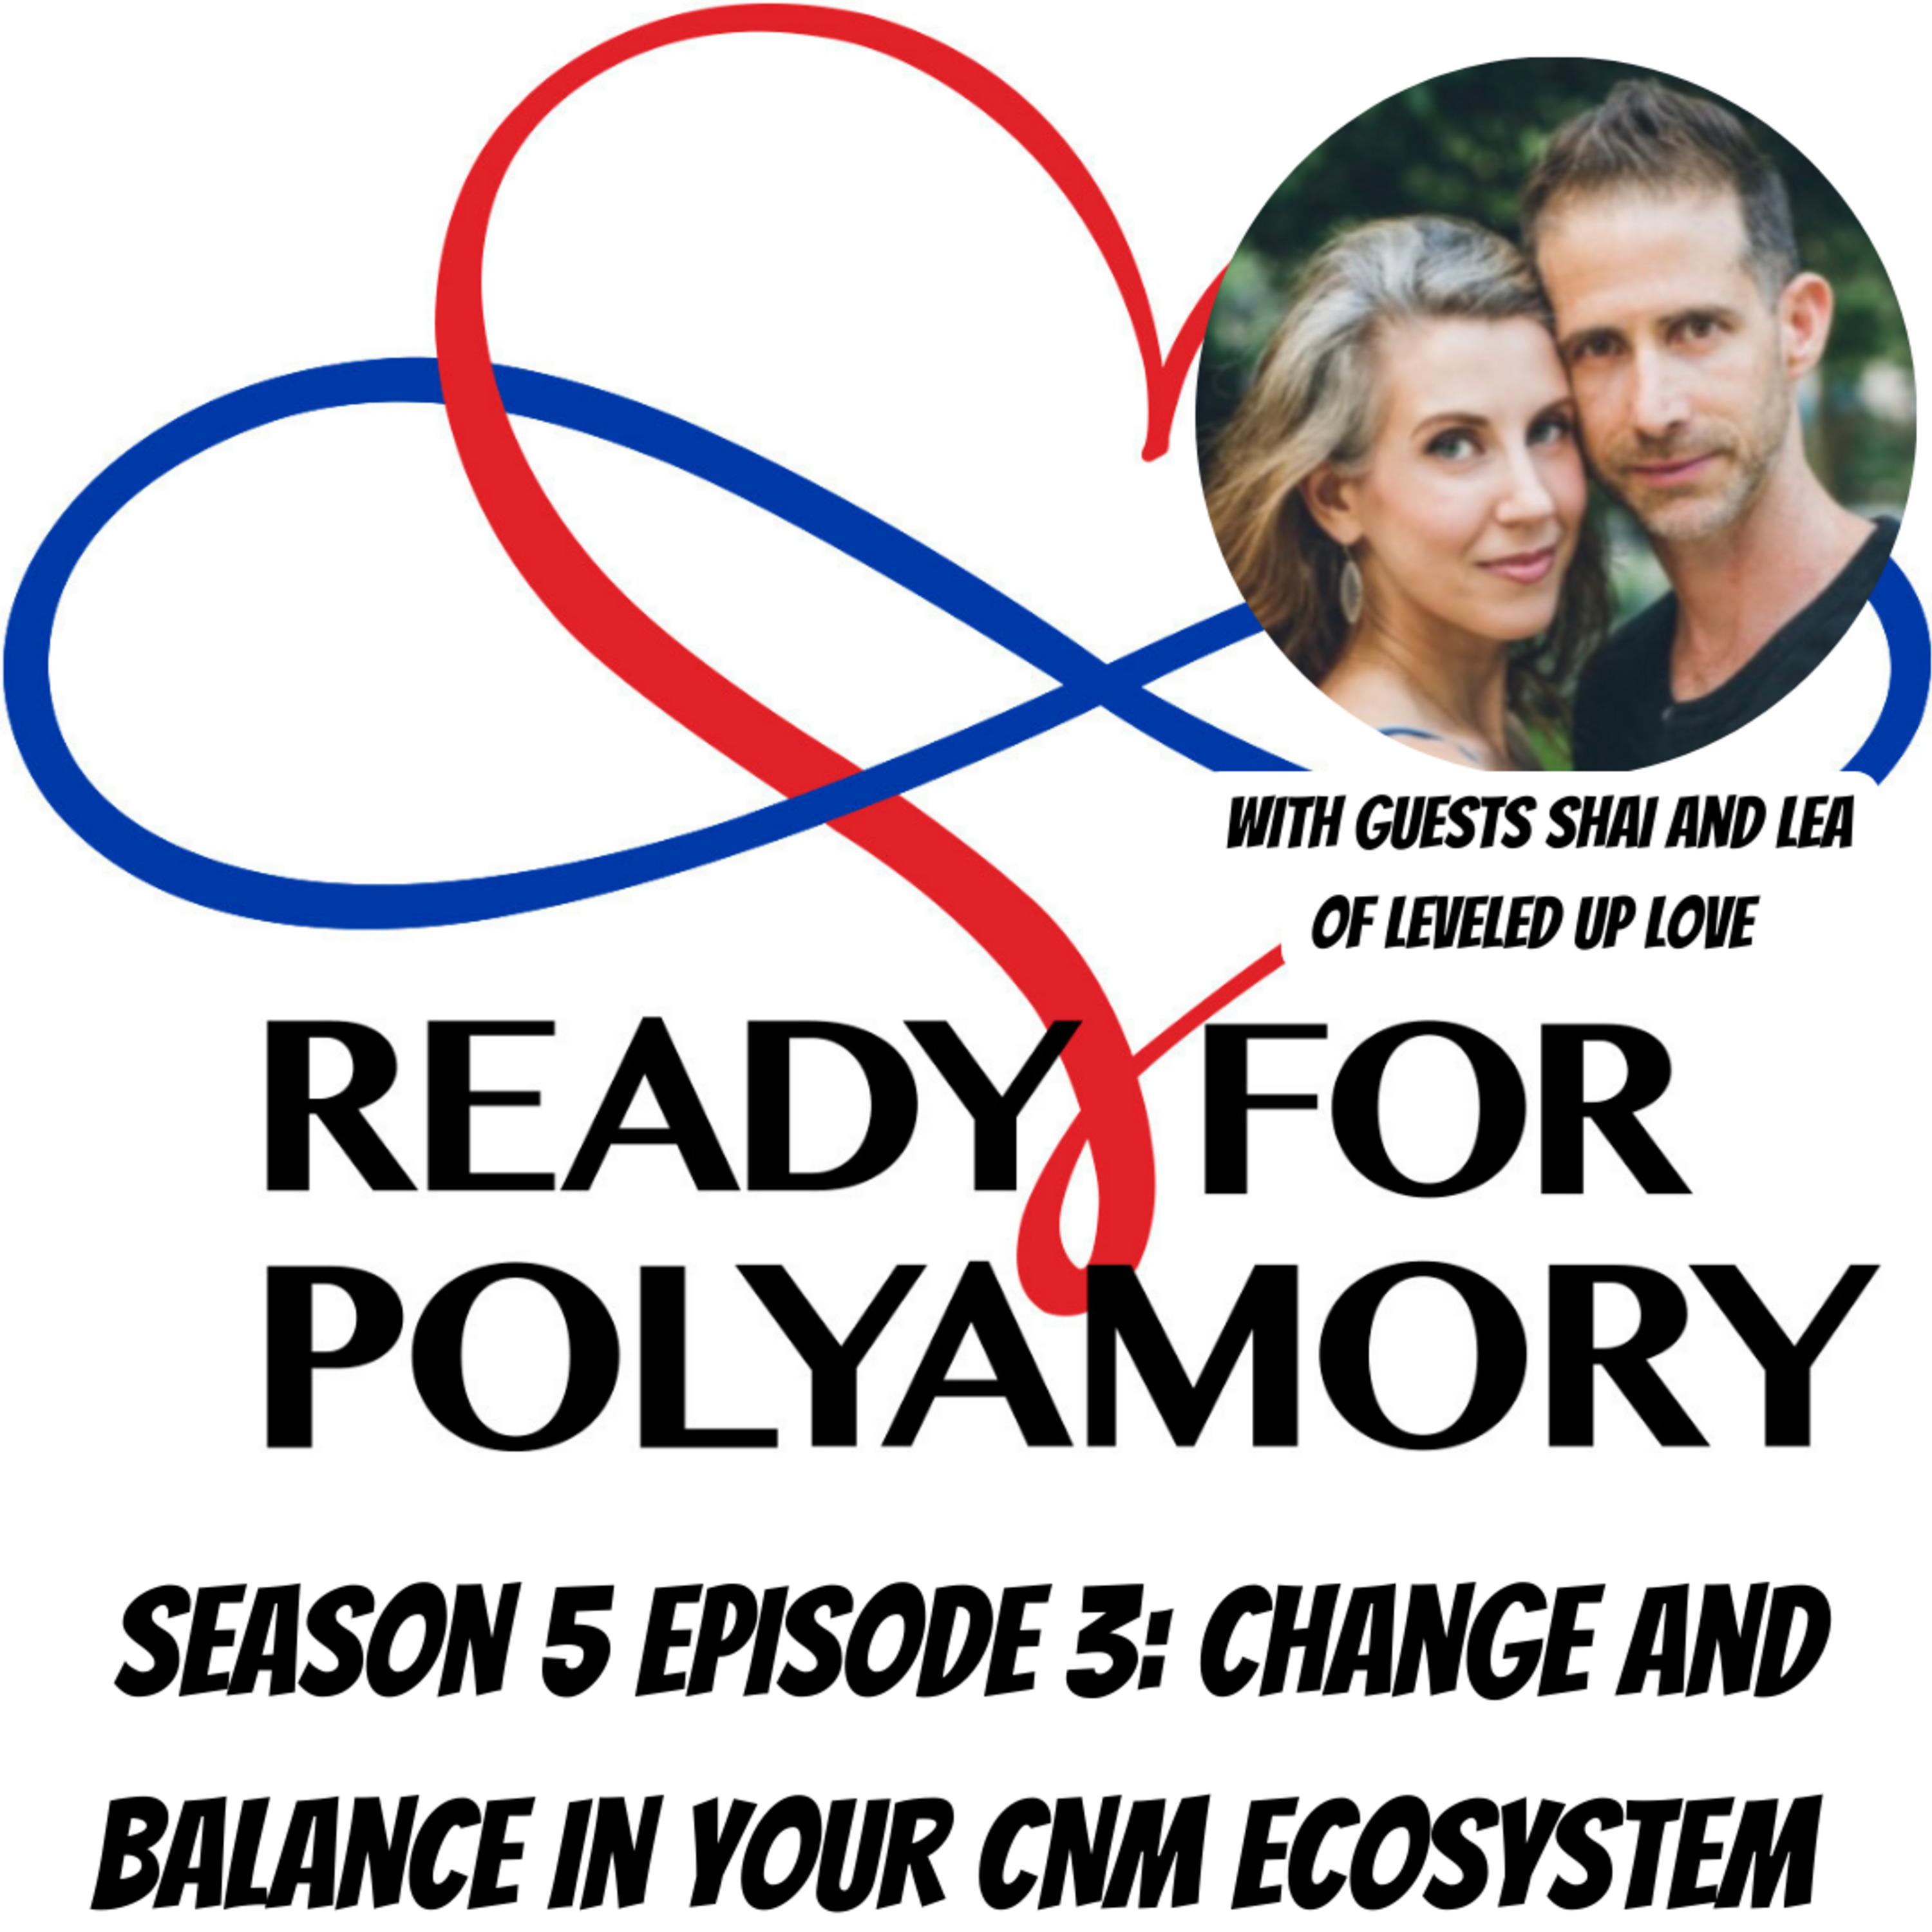 Season 5 Episode 3: Change and Balance in your CNM Ecosystem